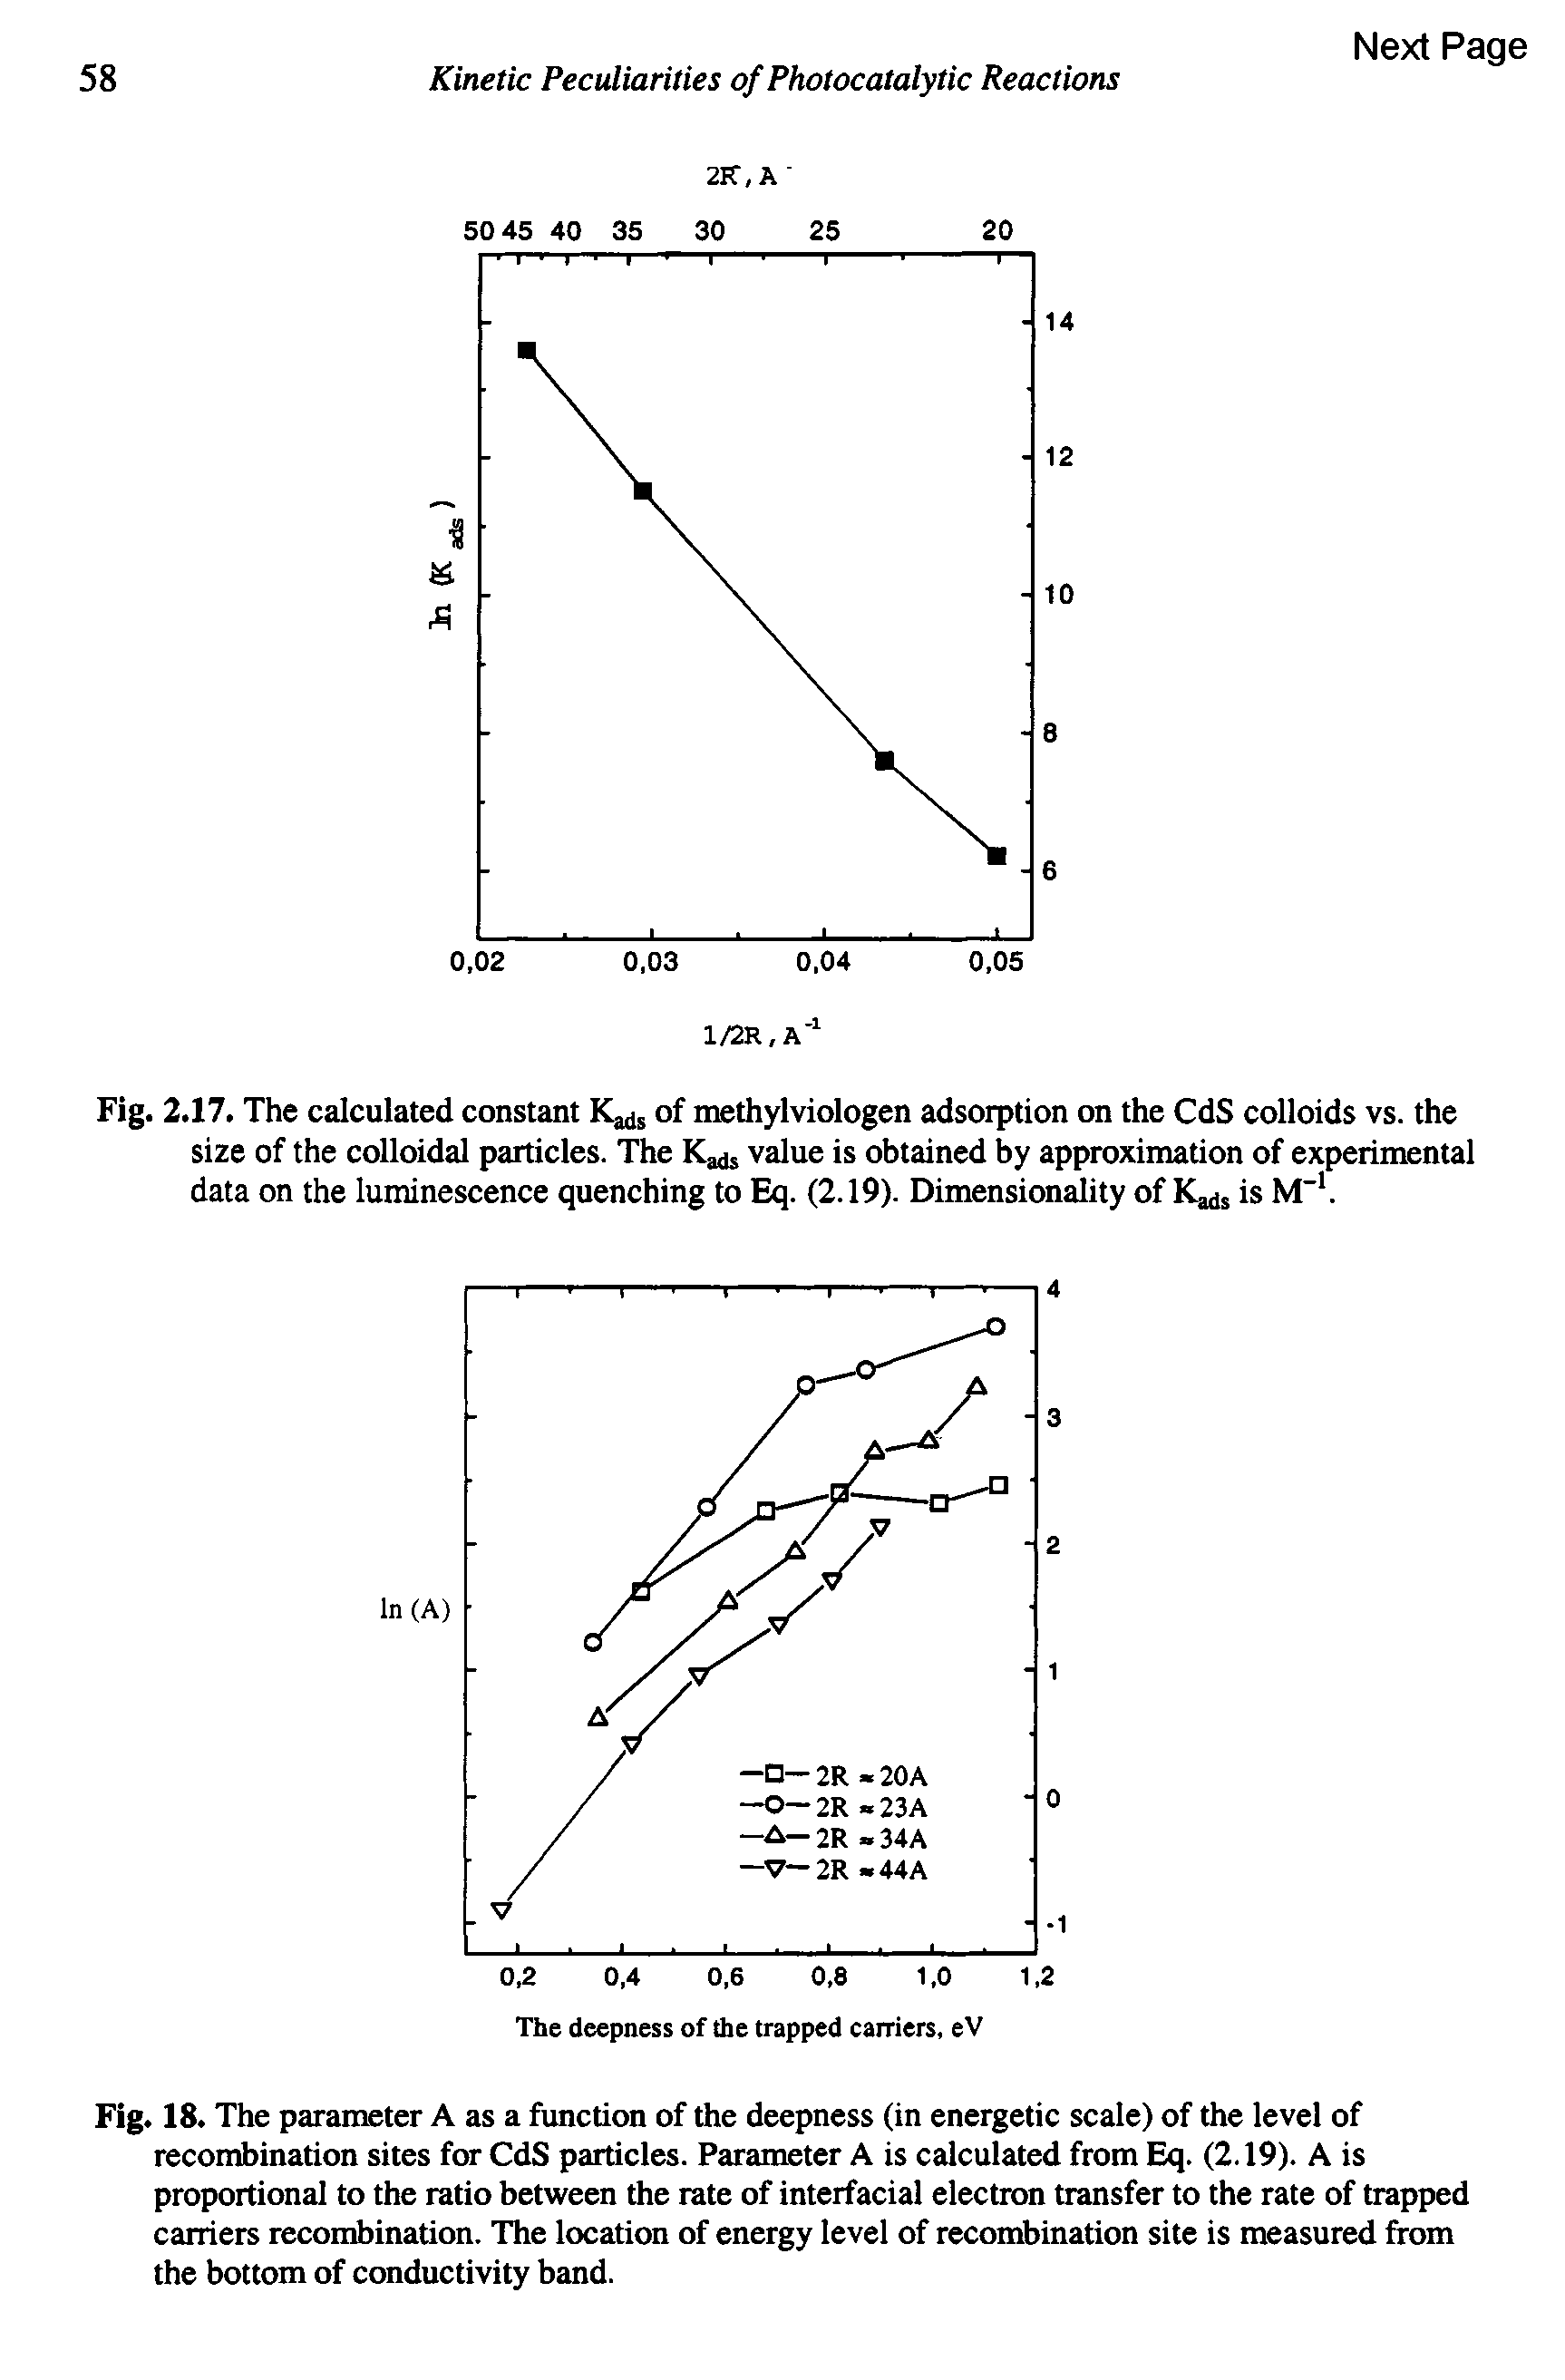 Fig. 2.17. The calculated constant of methylviologen adsorption on the CdS colloids vs. the size of the colloidal particles. The value is obtained by approximation of experimental data on the luminescence quenching to Eq. (2.19). Dimensionality of is M 1.